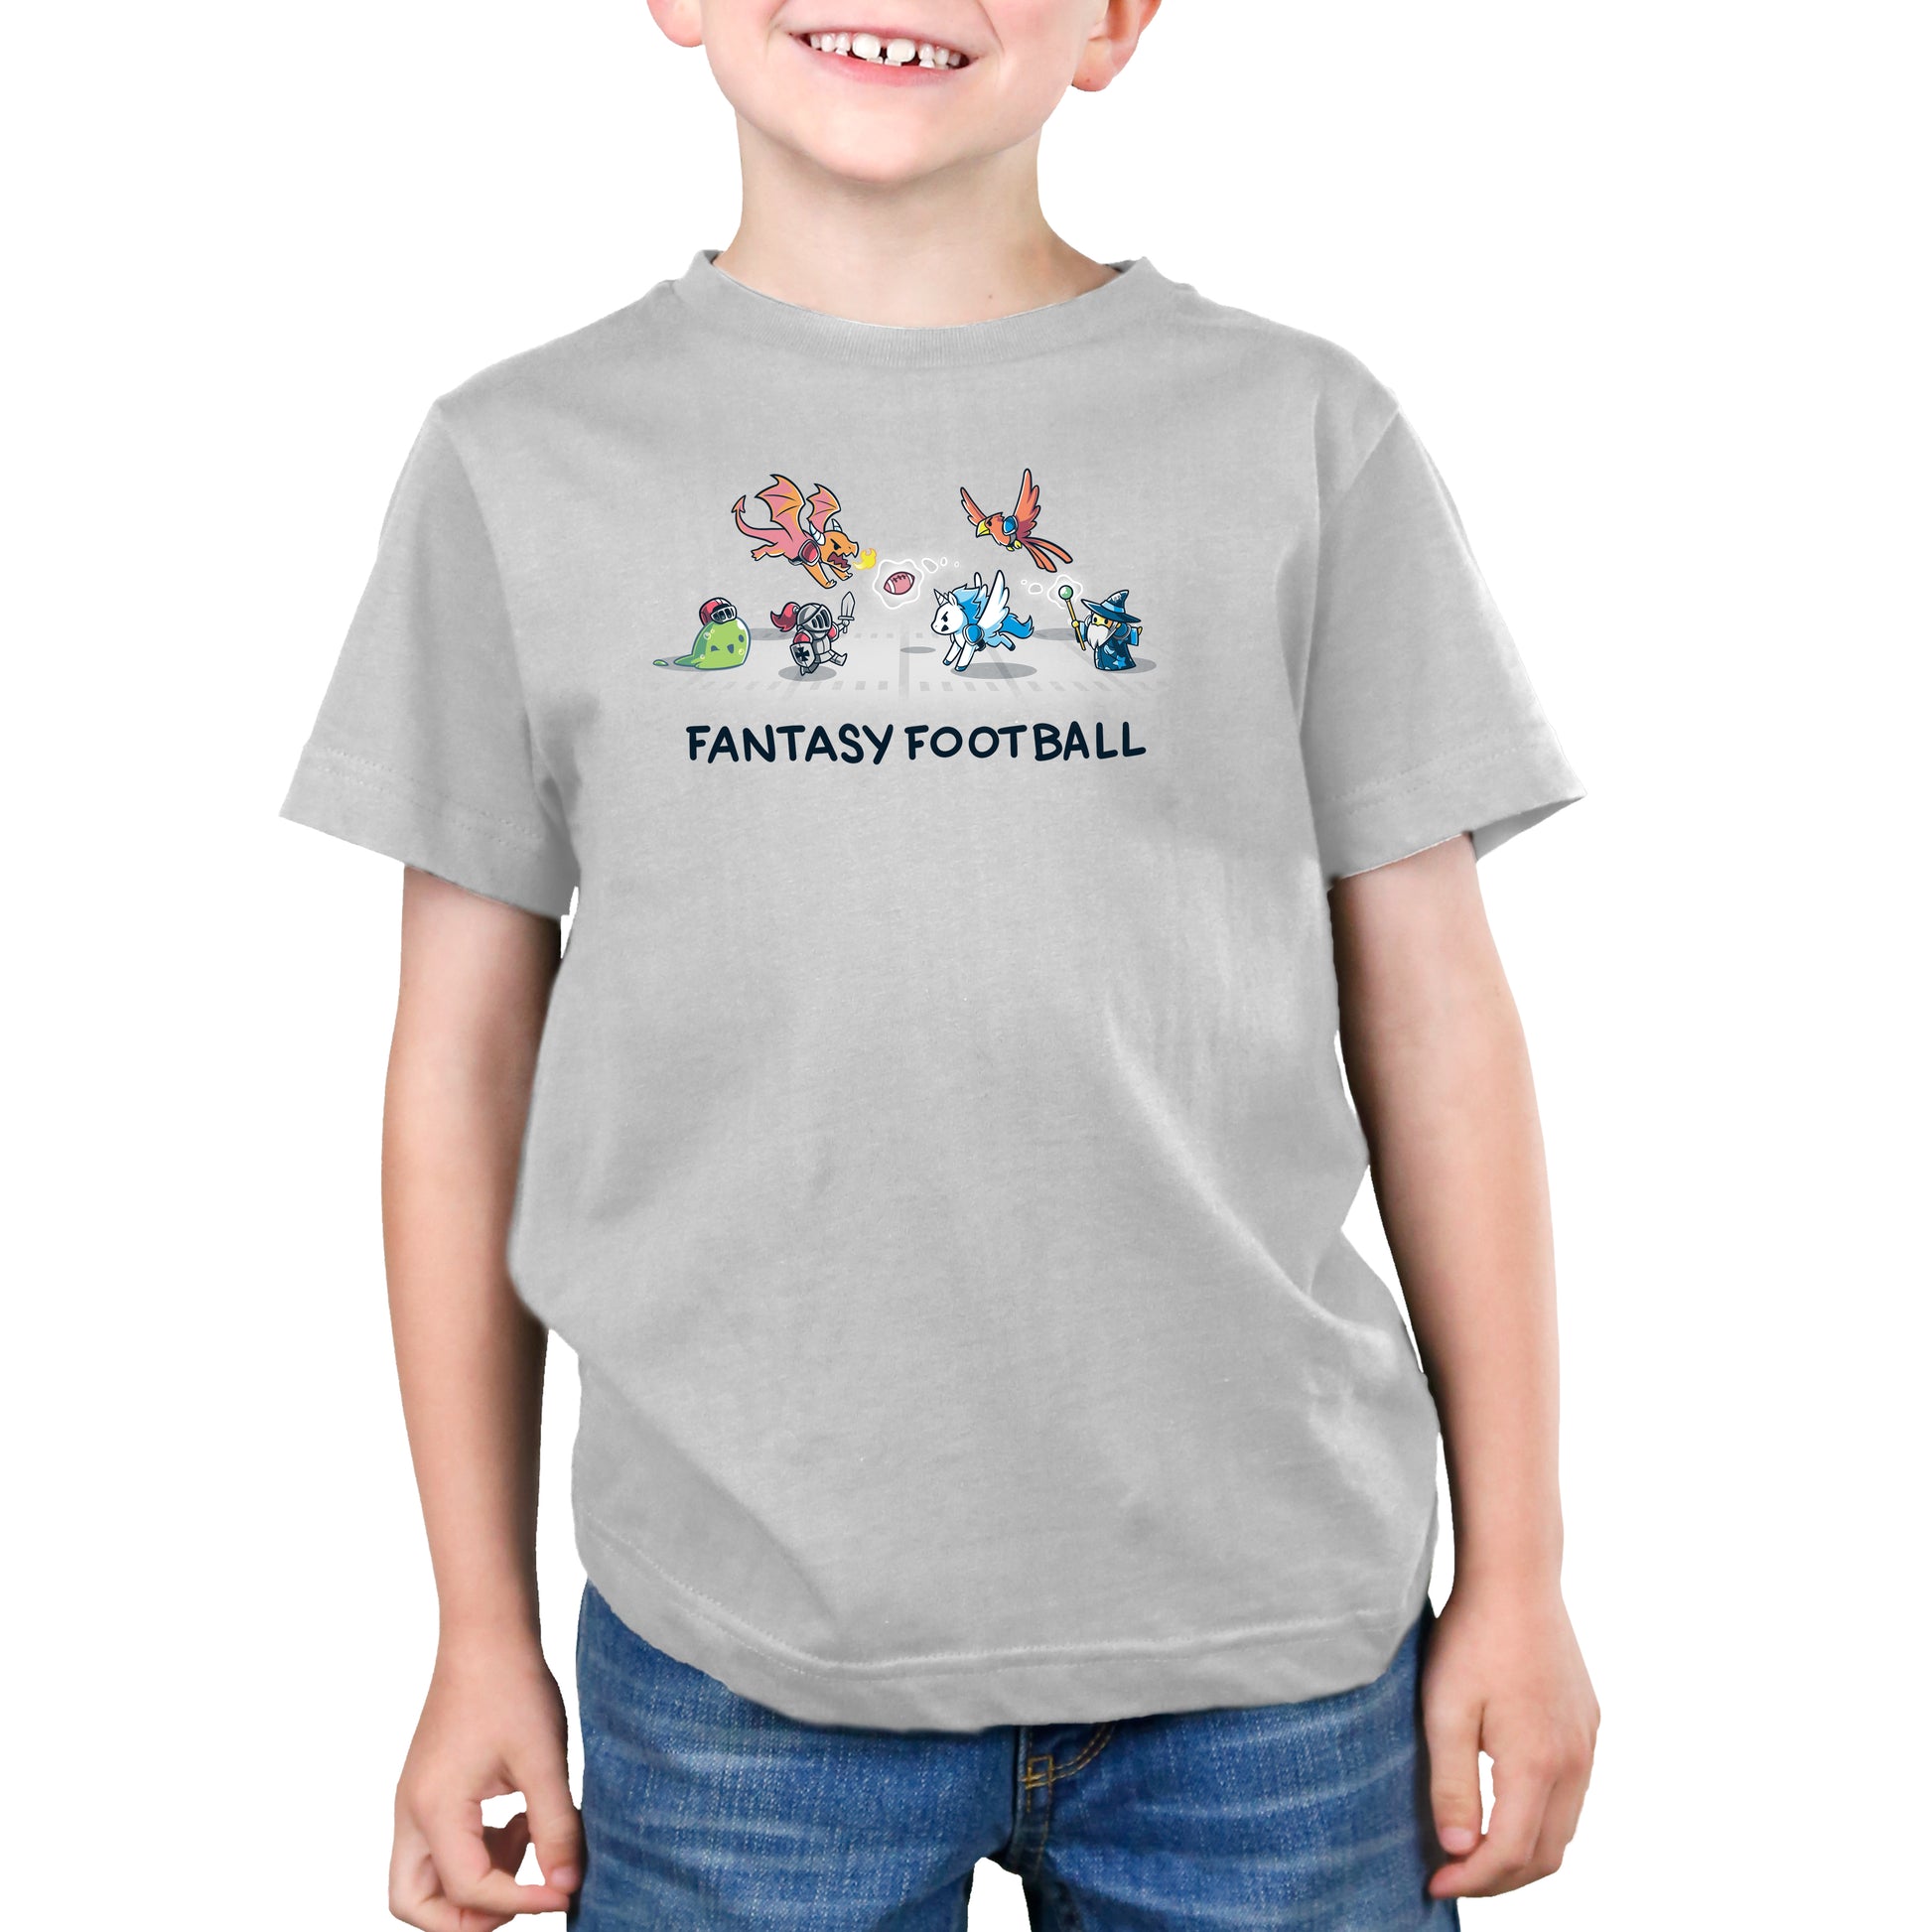 A young boy wearing a super soft ringspun "Fantasy Football" T-shirt by monsterdigital with colorful mythical creatures above the text stands against a plain white background.